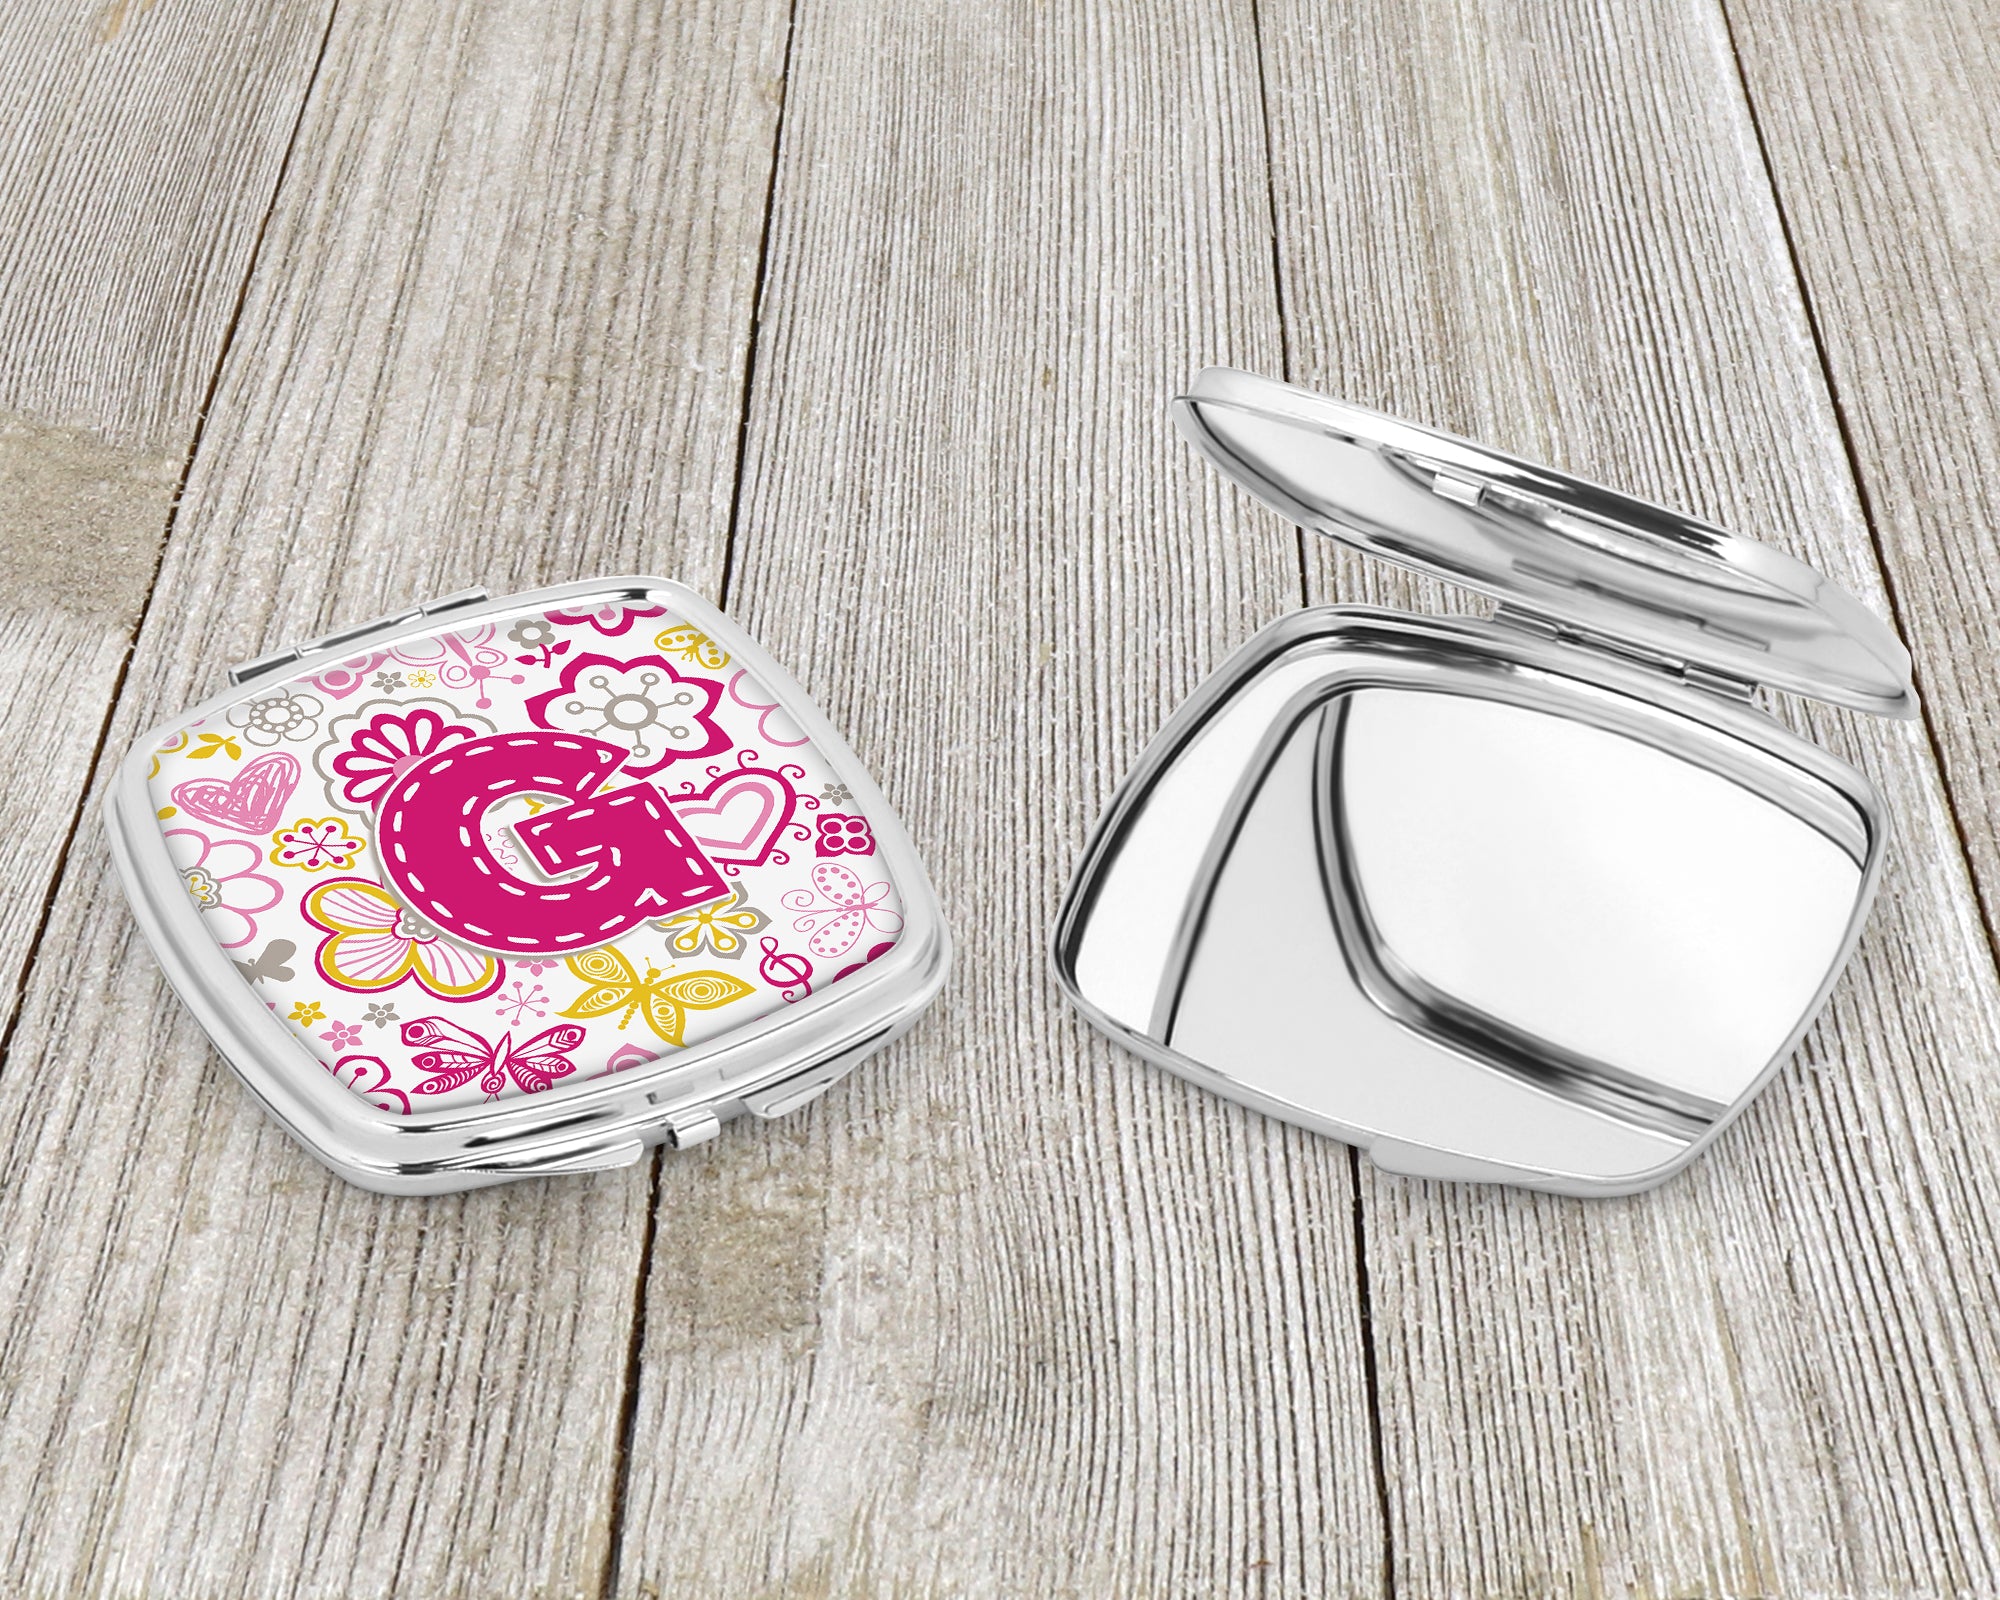 Letter G Flowers and Butterflies Pink Compact Mirror CJ2005-GSCM  the-store.com.